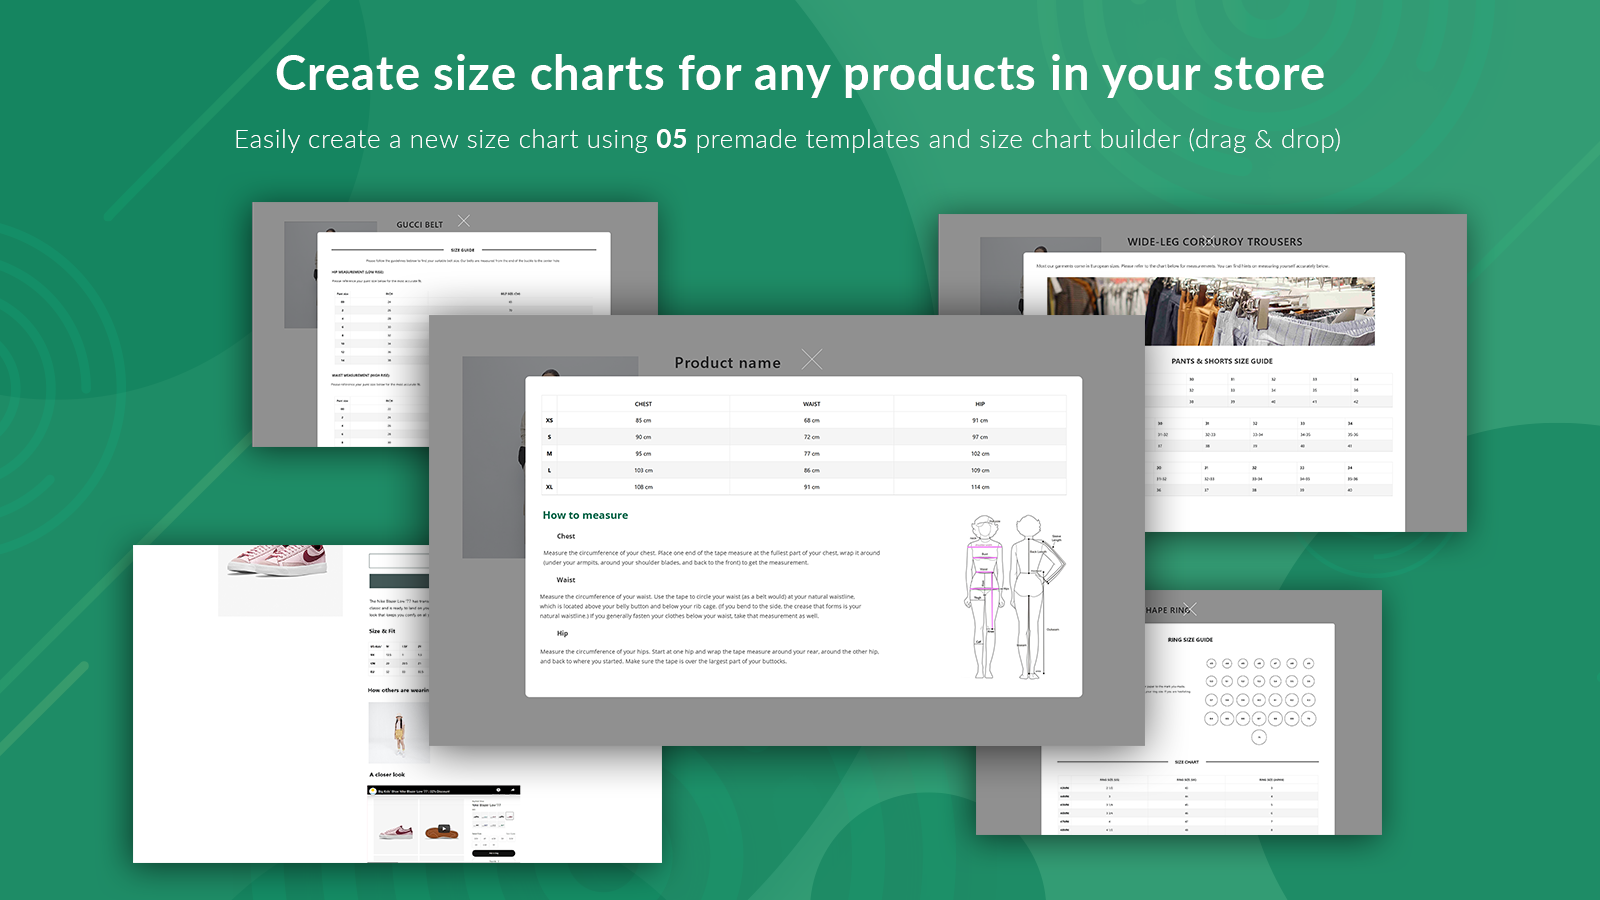 Create size chart for any product on your site